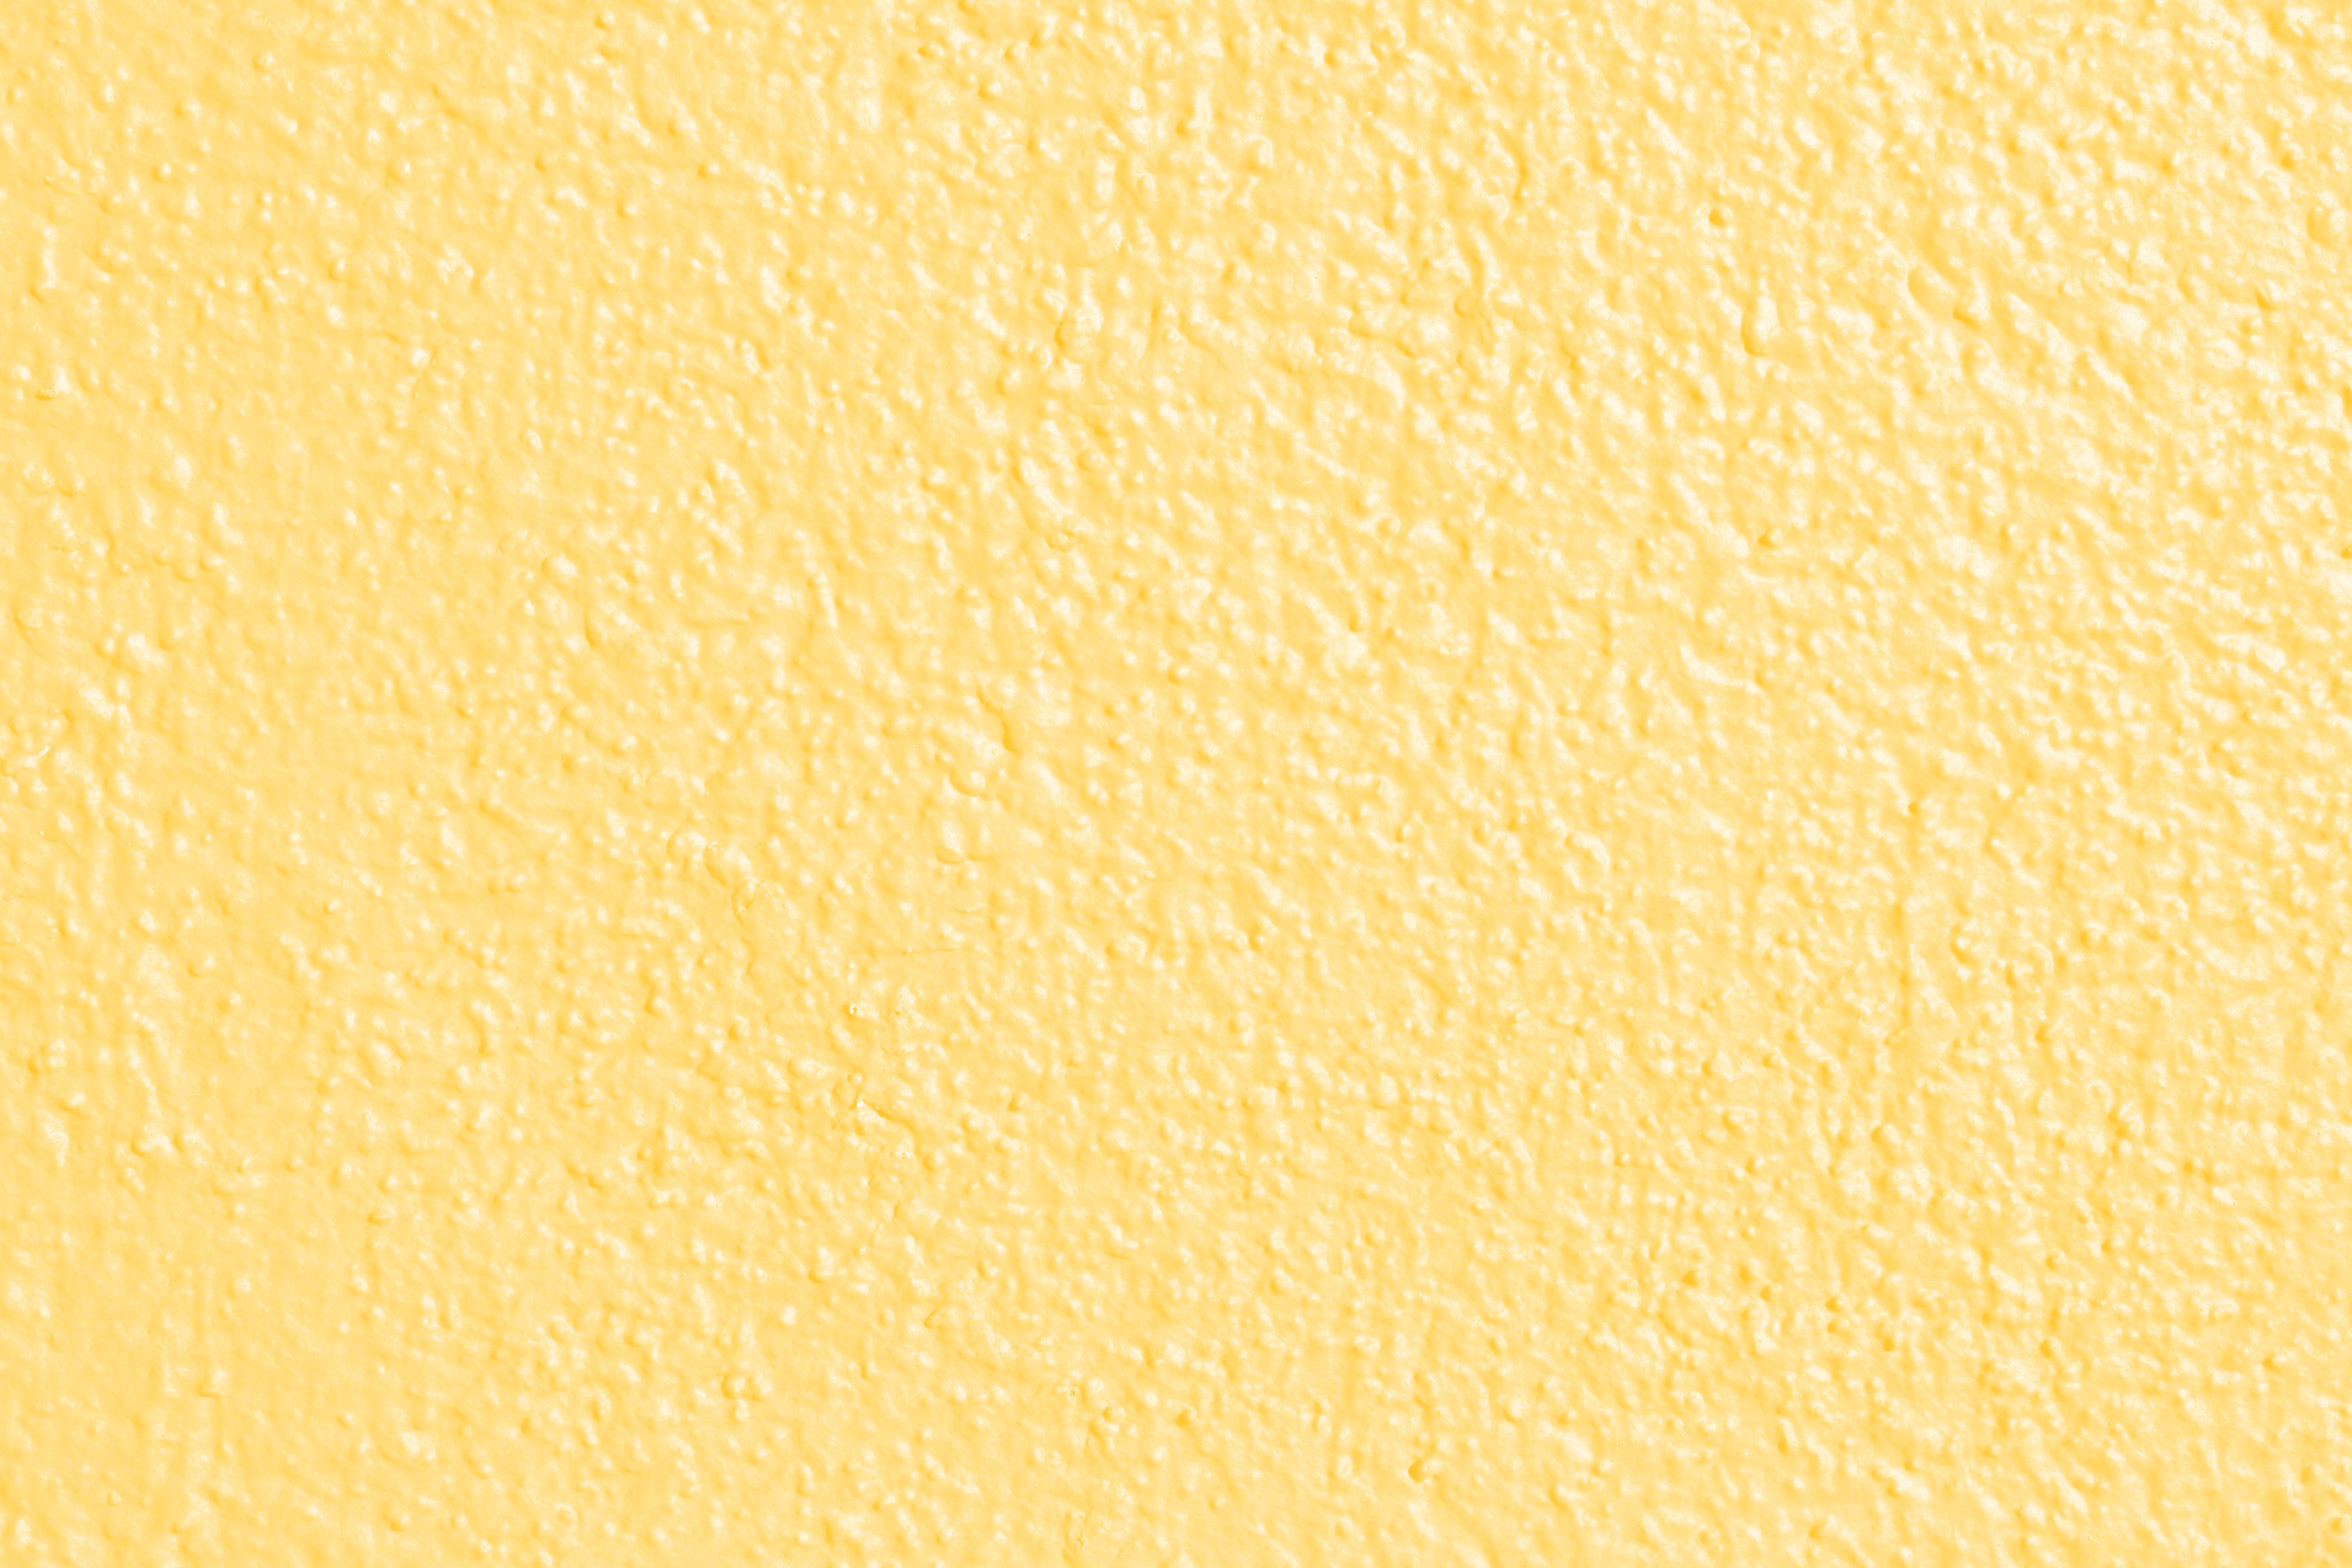 Marigold Or Butterscotch Colored Painted Wall Texture Picture